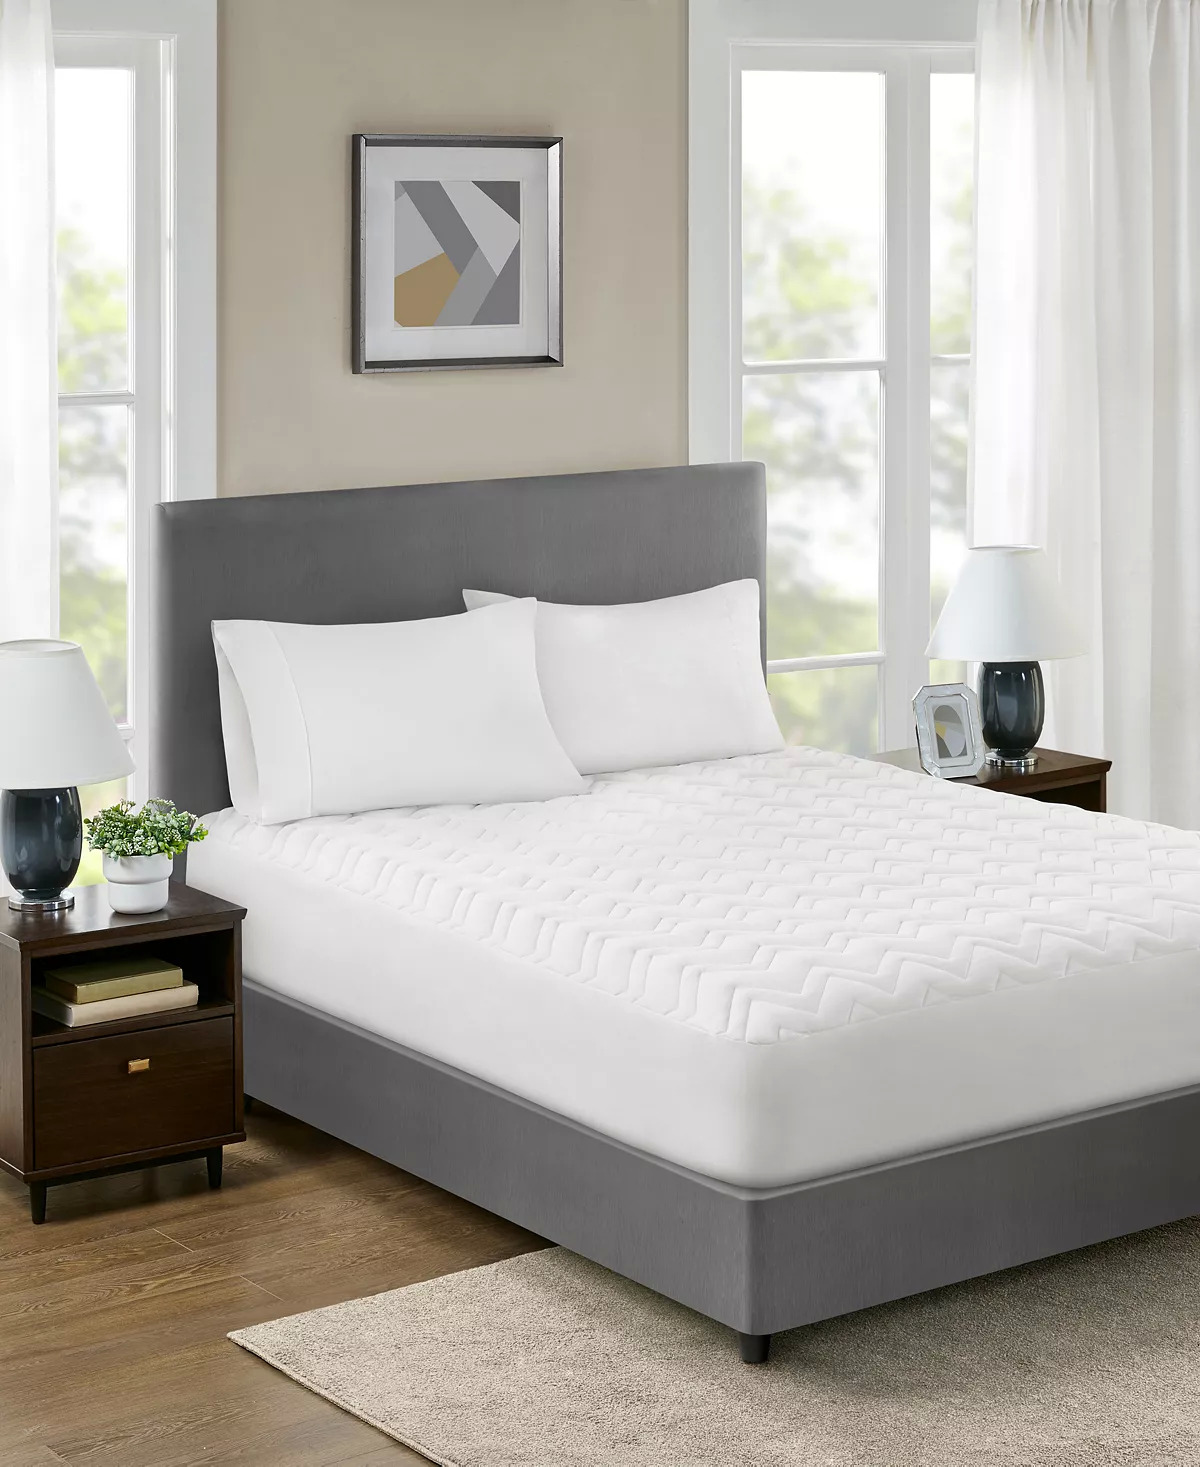 Home Design Easy Care Classic Mattress Pads (Twin/Twin XL) $14 Full $16 & More + Free Store Pickup at Macy's or F/S on Orders $25+